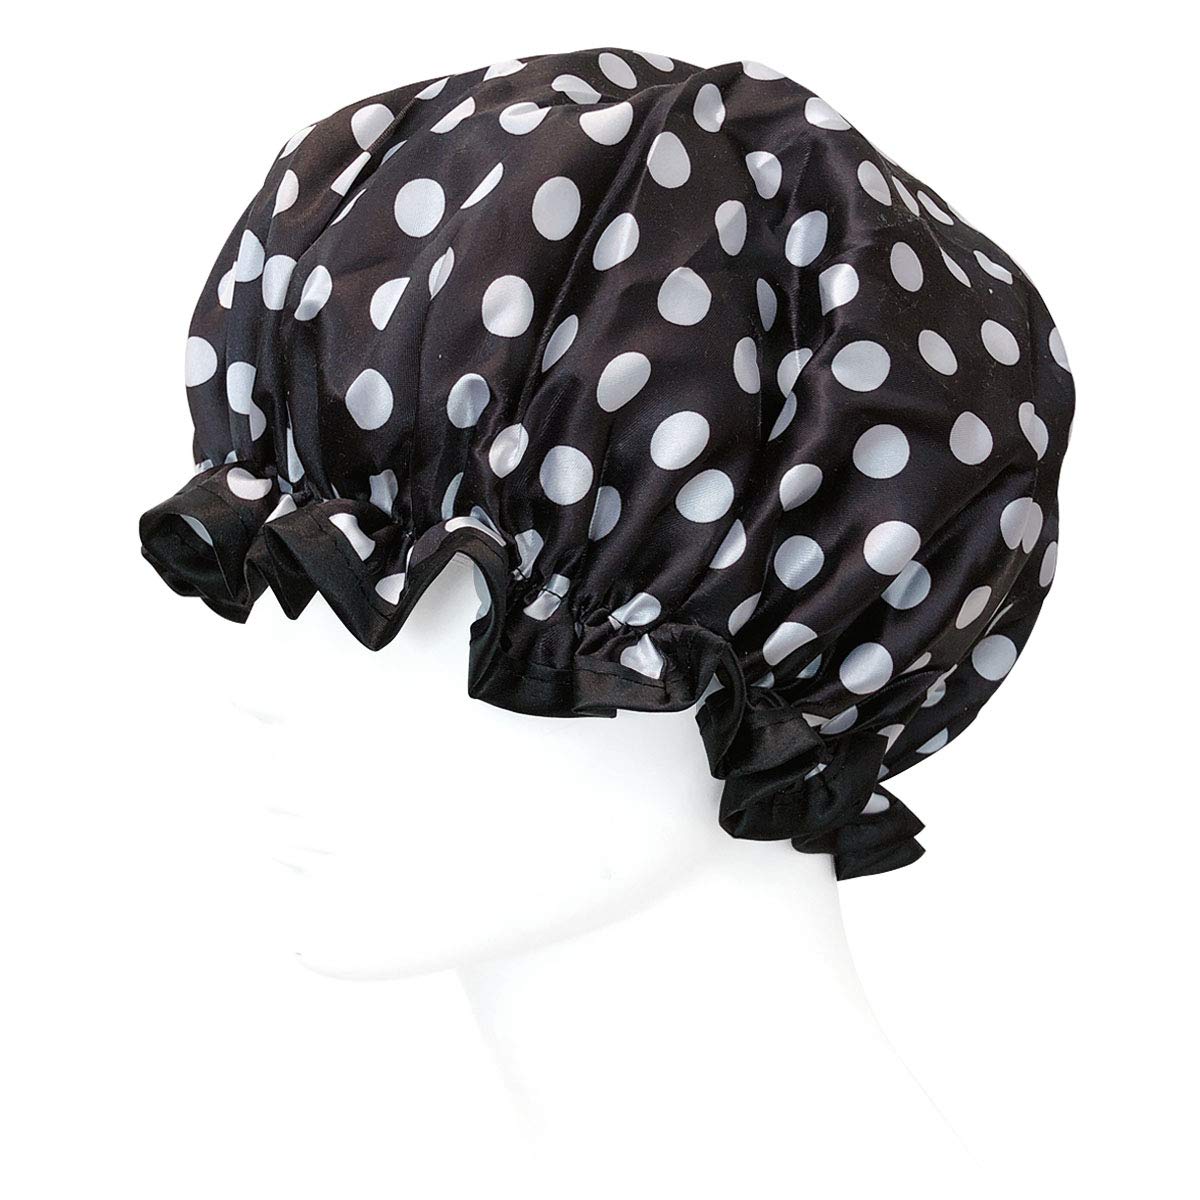 allydrew Reusable Women's Waterproof Shower Caps for Long Hair, Black and White Dots